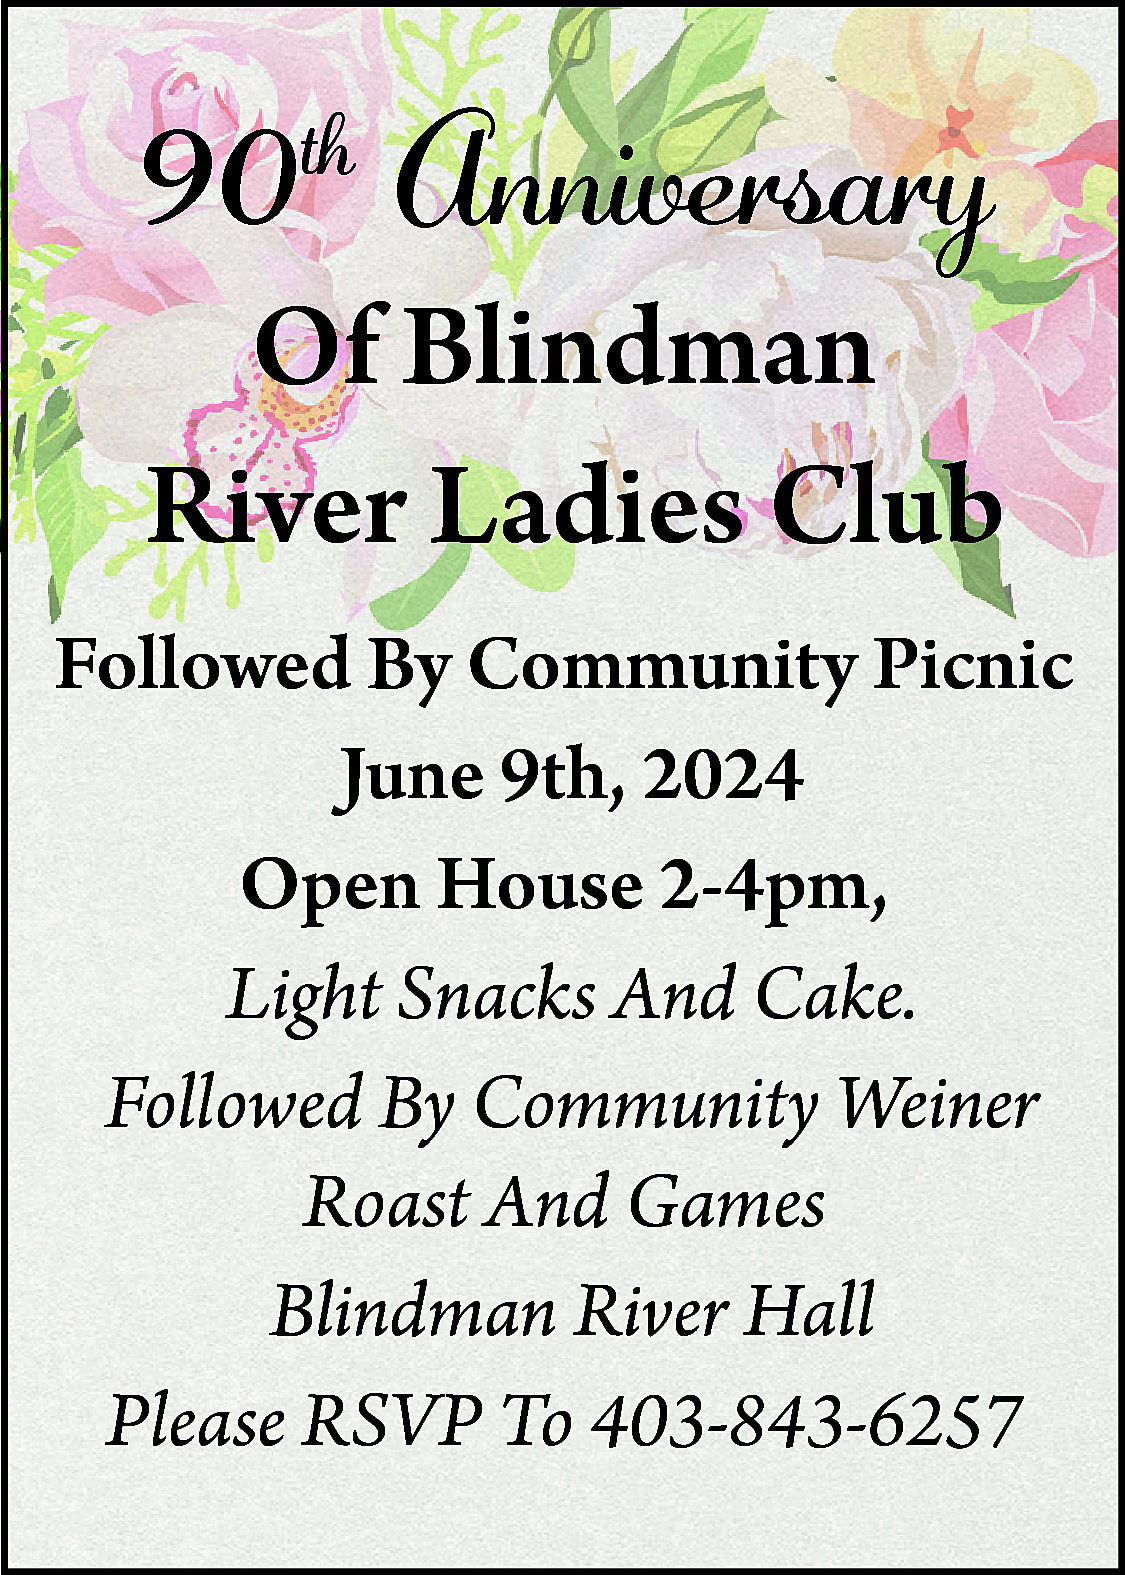 90th Anniversary <br> <br>Of Blindman  90th Anniversary    Of Blindman  River Ladies Club    Followed By Community Picnic  June 9th, 2024  Open House 2-4pm,  Light Snacks And Cake.  Followed By Community Weiner  Roast And Games  Blindman River Hall  Please RSVP To 403-843-6257    